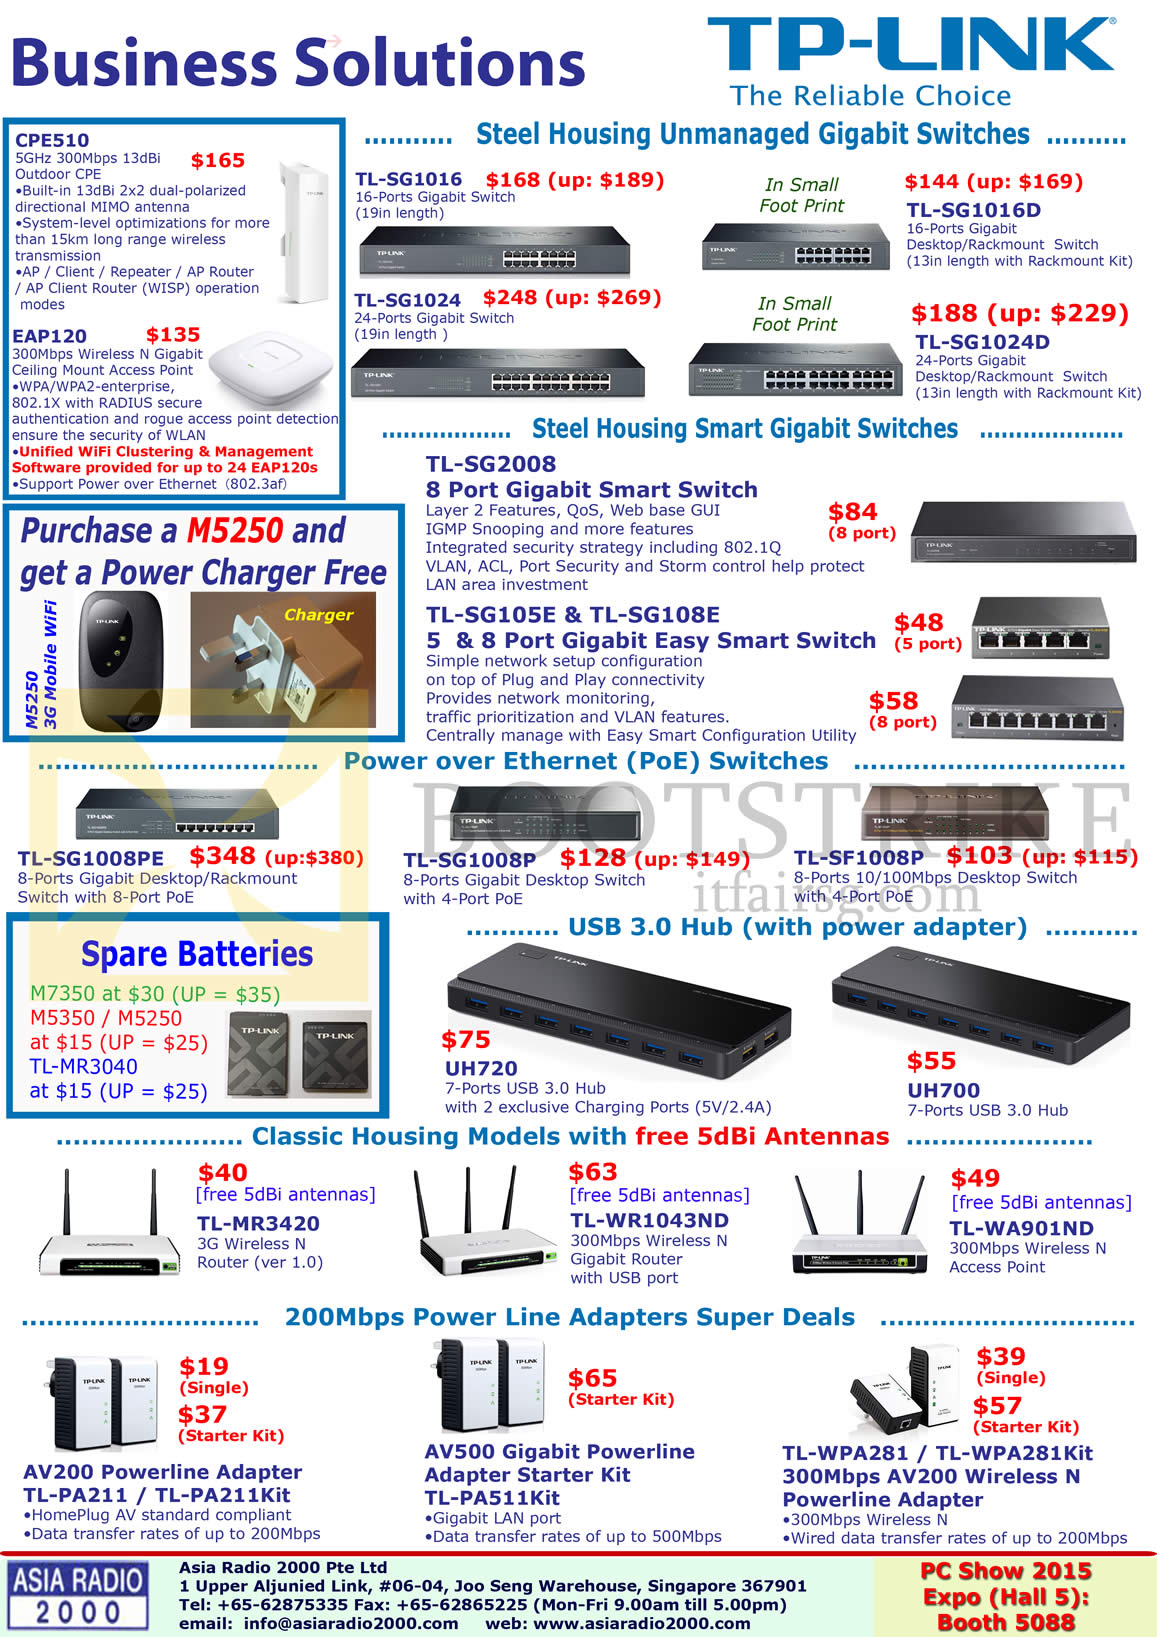 PC SHOW 2015 price list image brochure of Asia Radio TP-Link Networking Gigabit Switches, Ethernet Switches, USB 3.0 Hub, Antennas, 200Mbps Power Line Adapters Super Deals